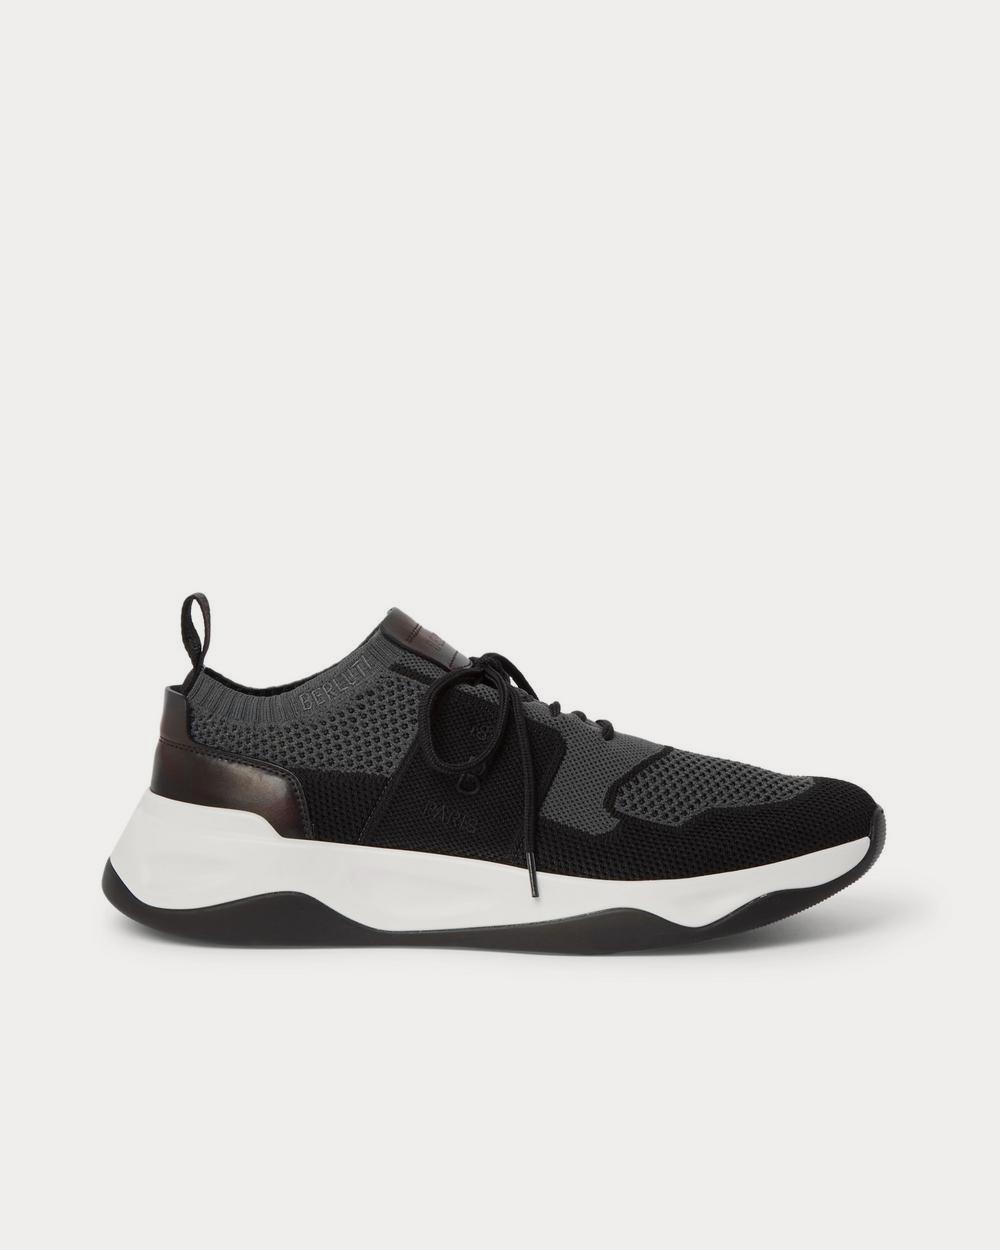 Berluti Handmade Mens Sports Shoes Leather And Nylon Dress Sneakers For Men  With Luxury High Quality Training And Casual Commuting Options From  Berminghan, $246.24 | DHgate.Com